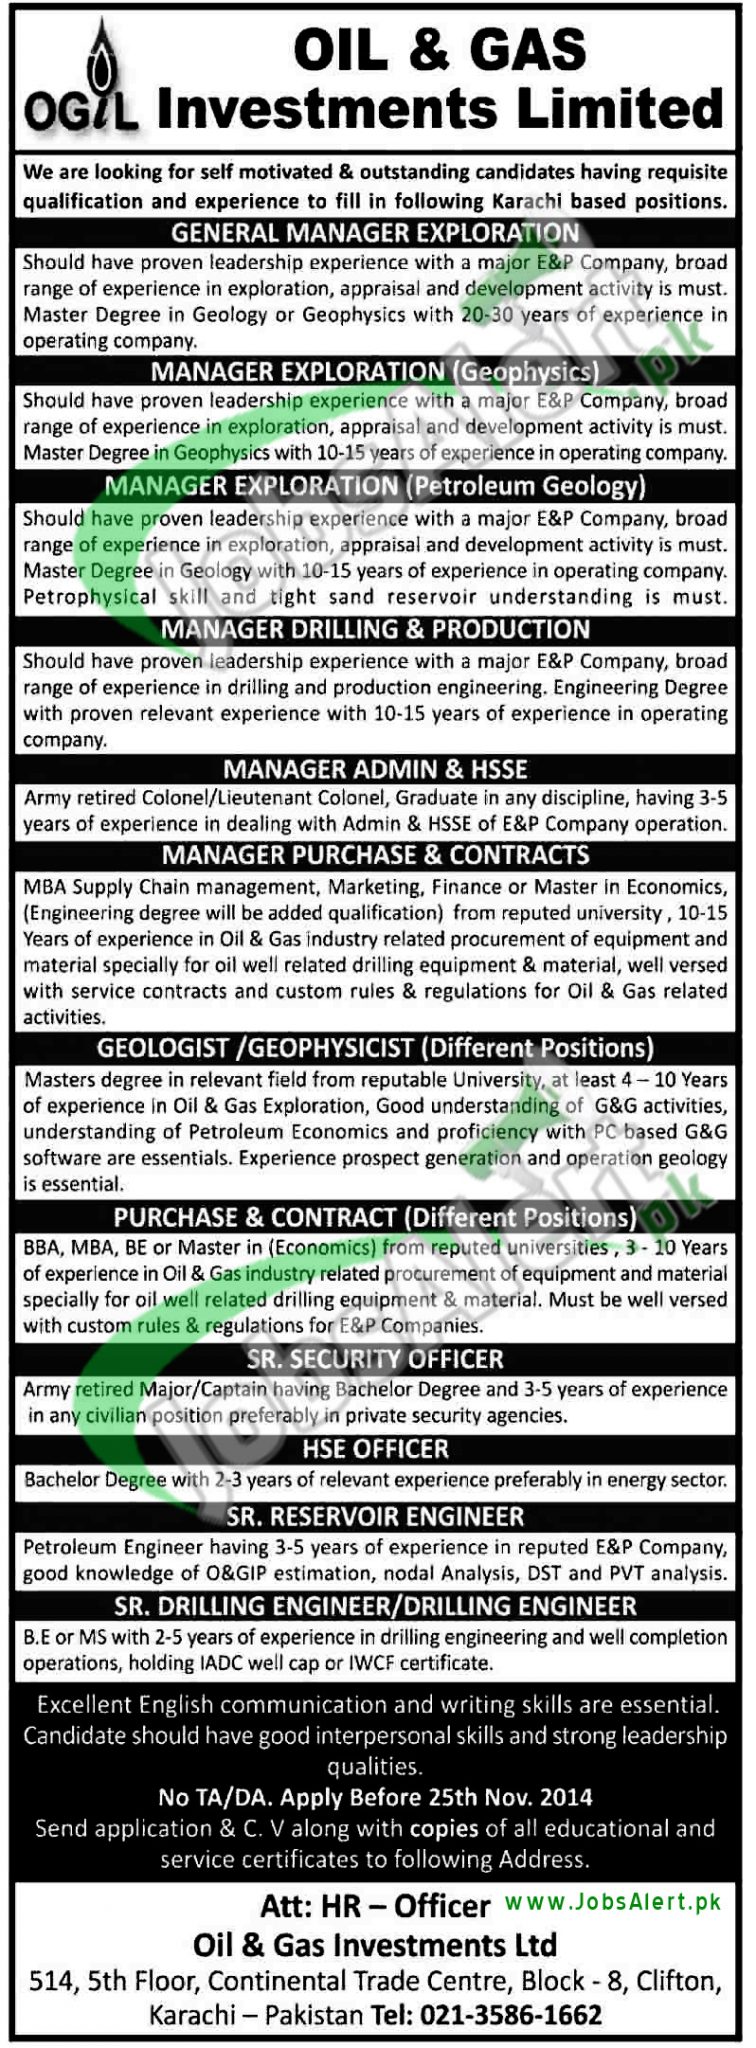 Oil and Gas Jobs 